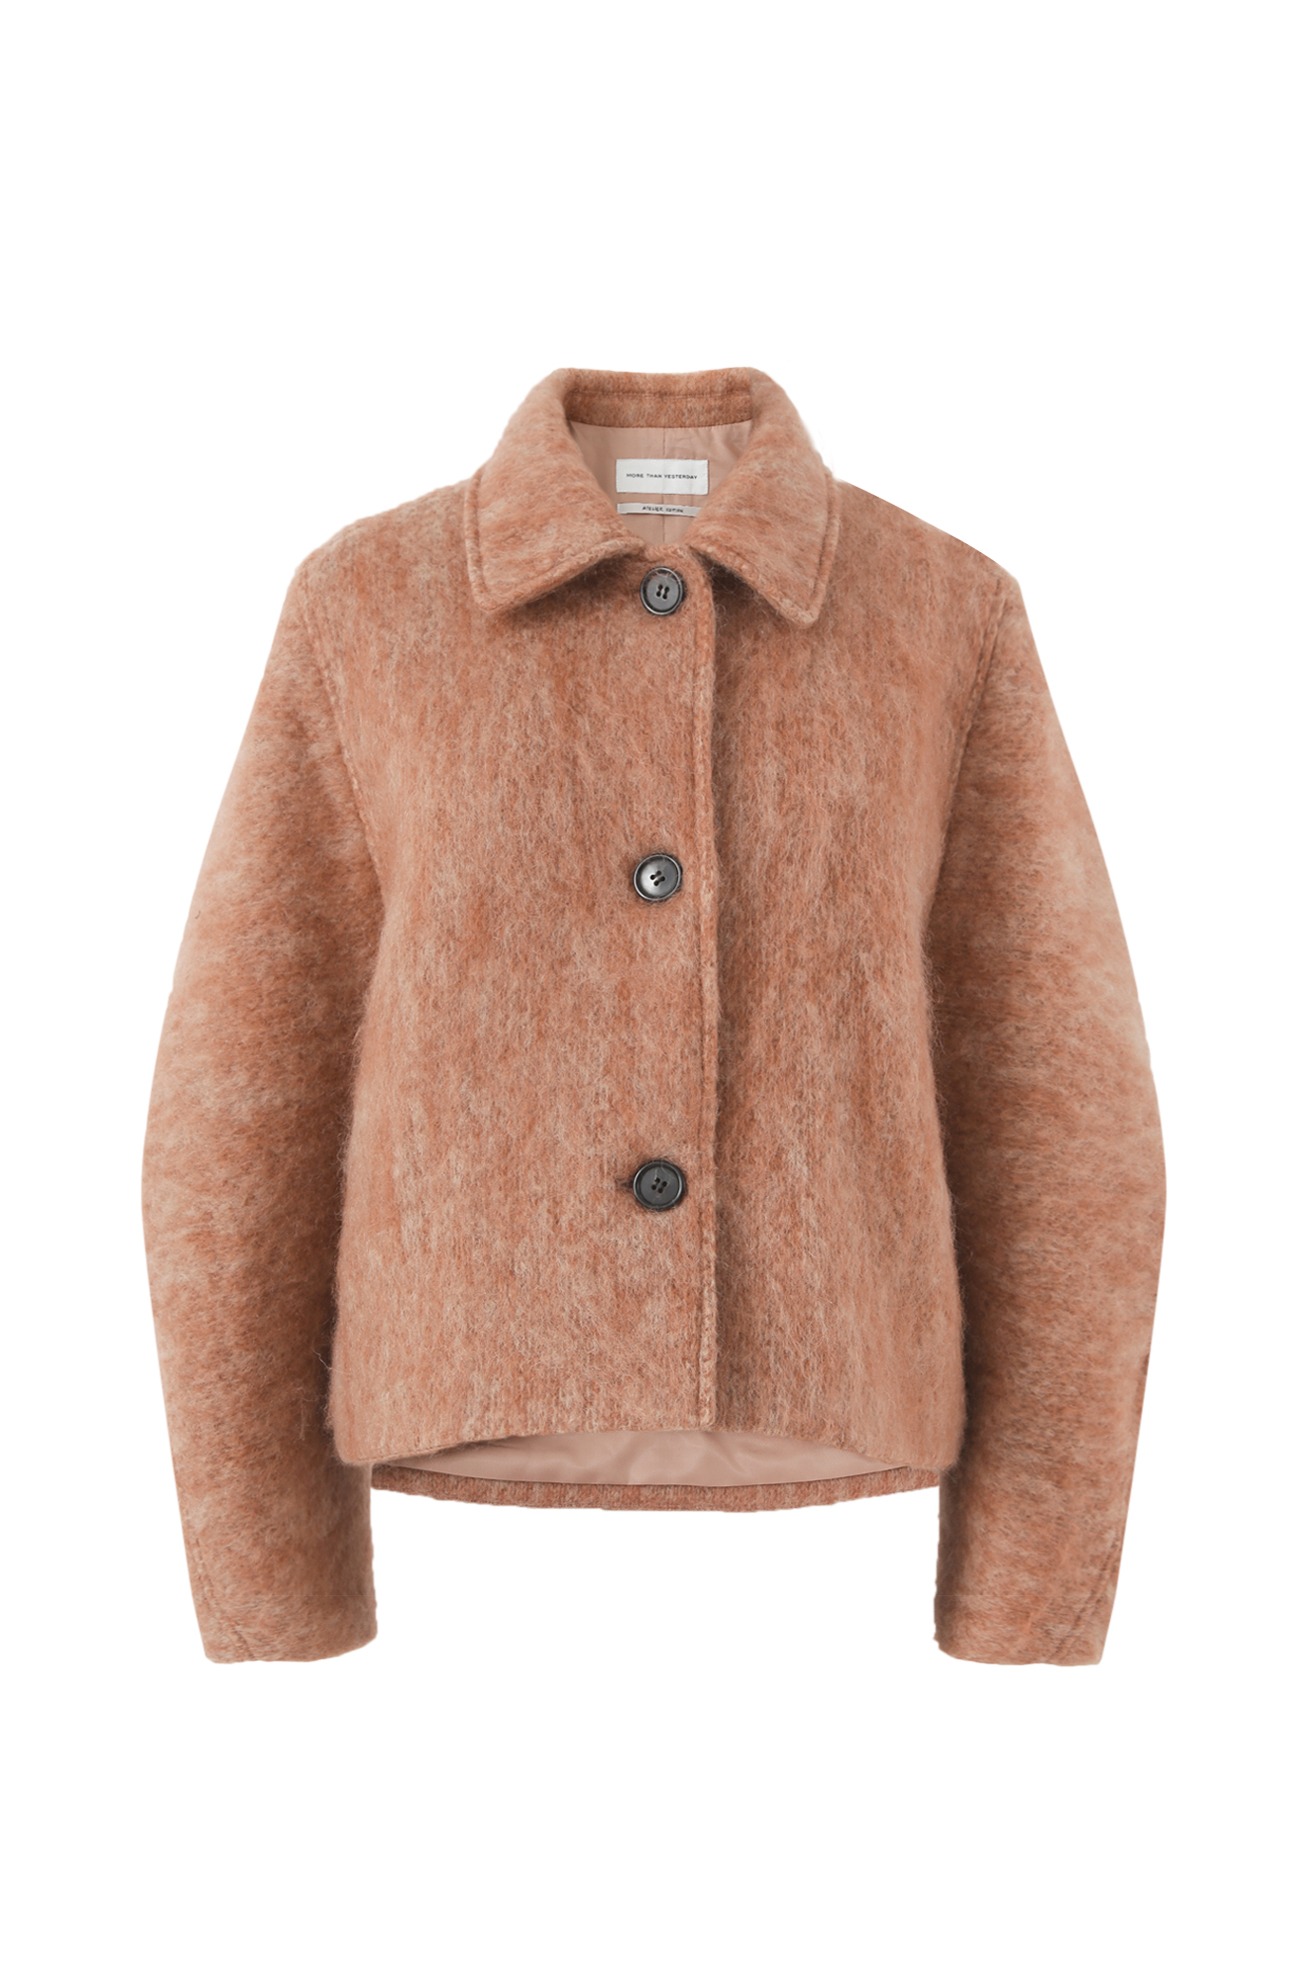 CROPPED MOHAIR JACKET (ORANGE BROWN) <br><sub><mark><strong>ATELIER EDITION</strong></sub><br>